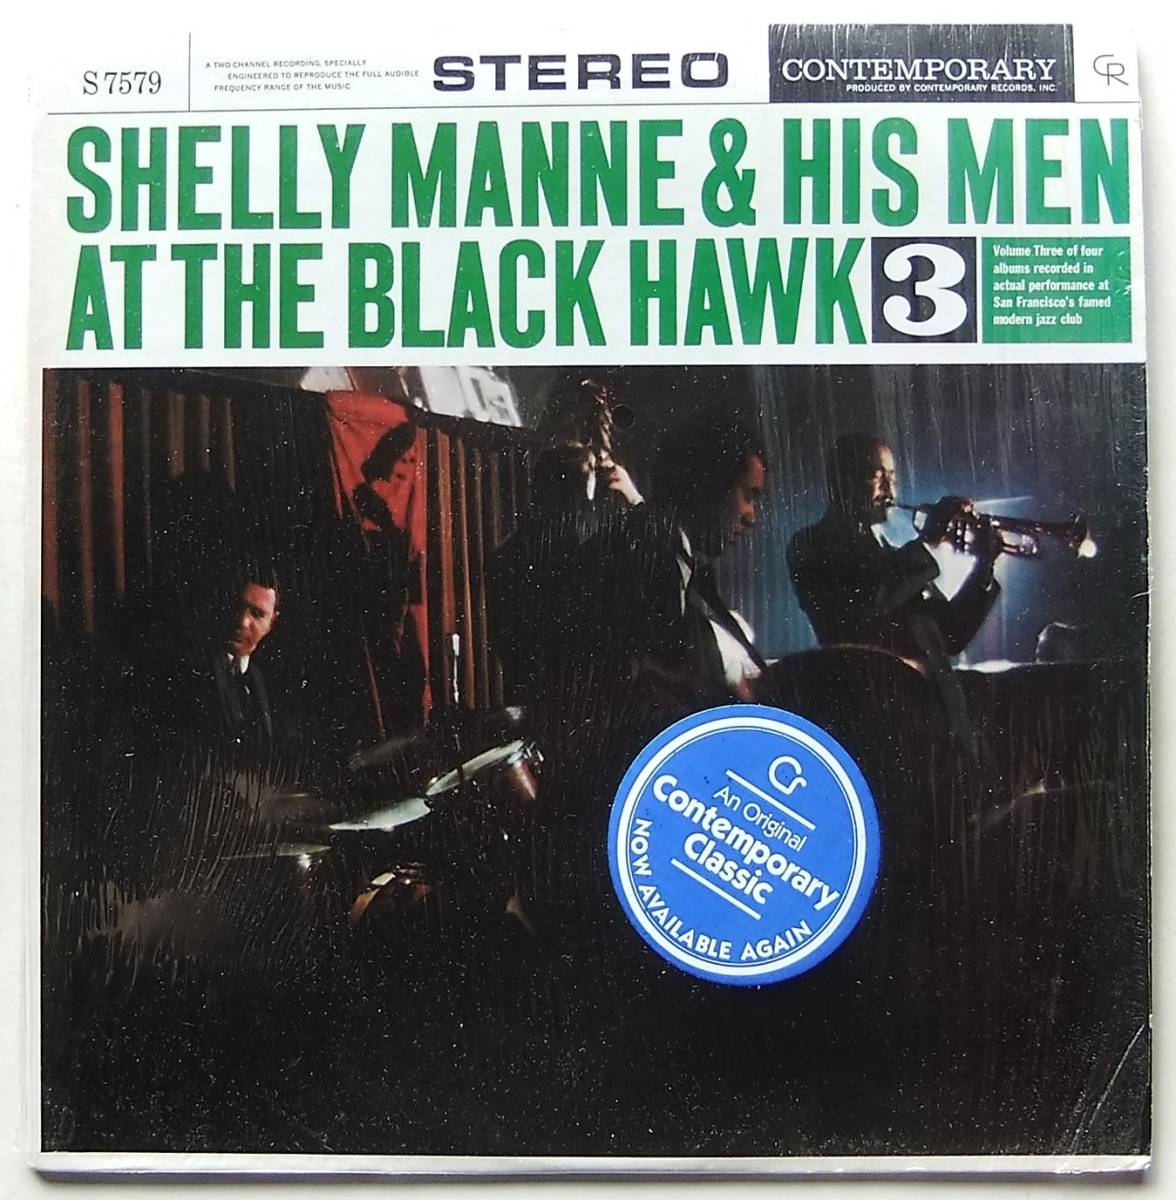 ◆ SHELLY MANNE & His Men at the Black Hawk, Vol.3 ◆ Contemporary S7579 ◆_画像1